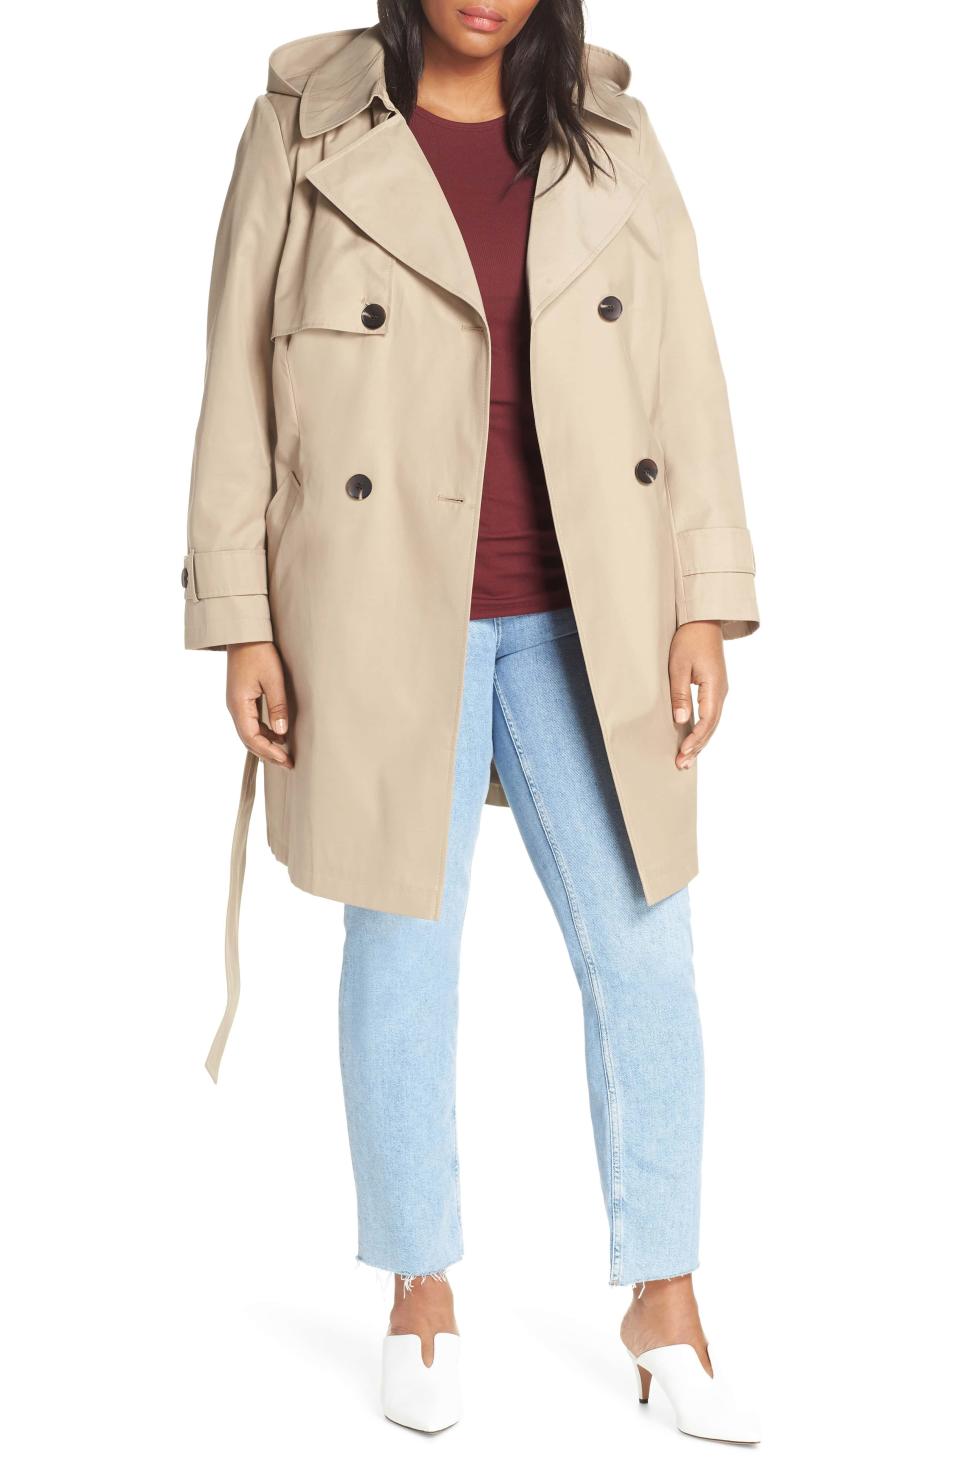 14) A Transitional Trench Coat for Any Temperature